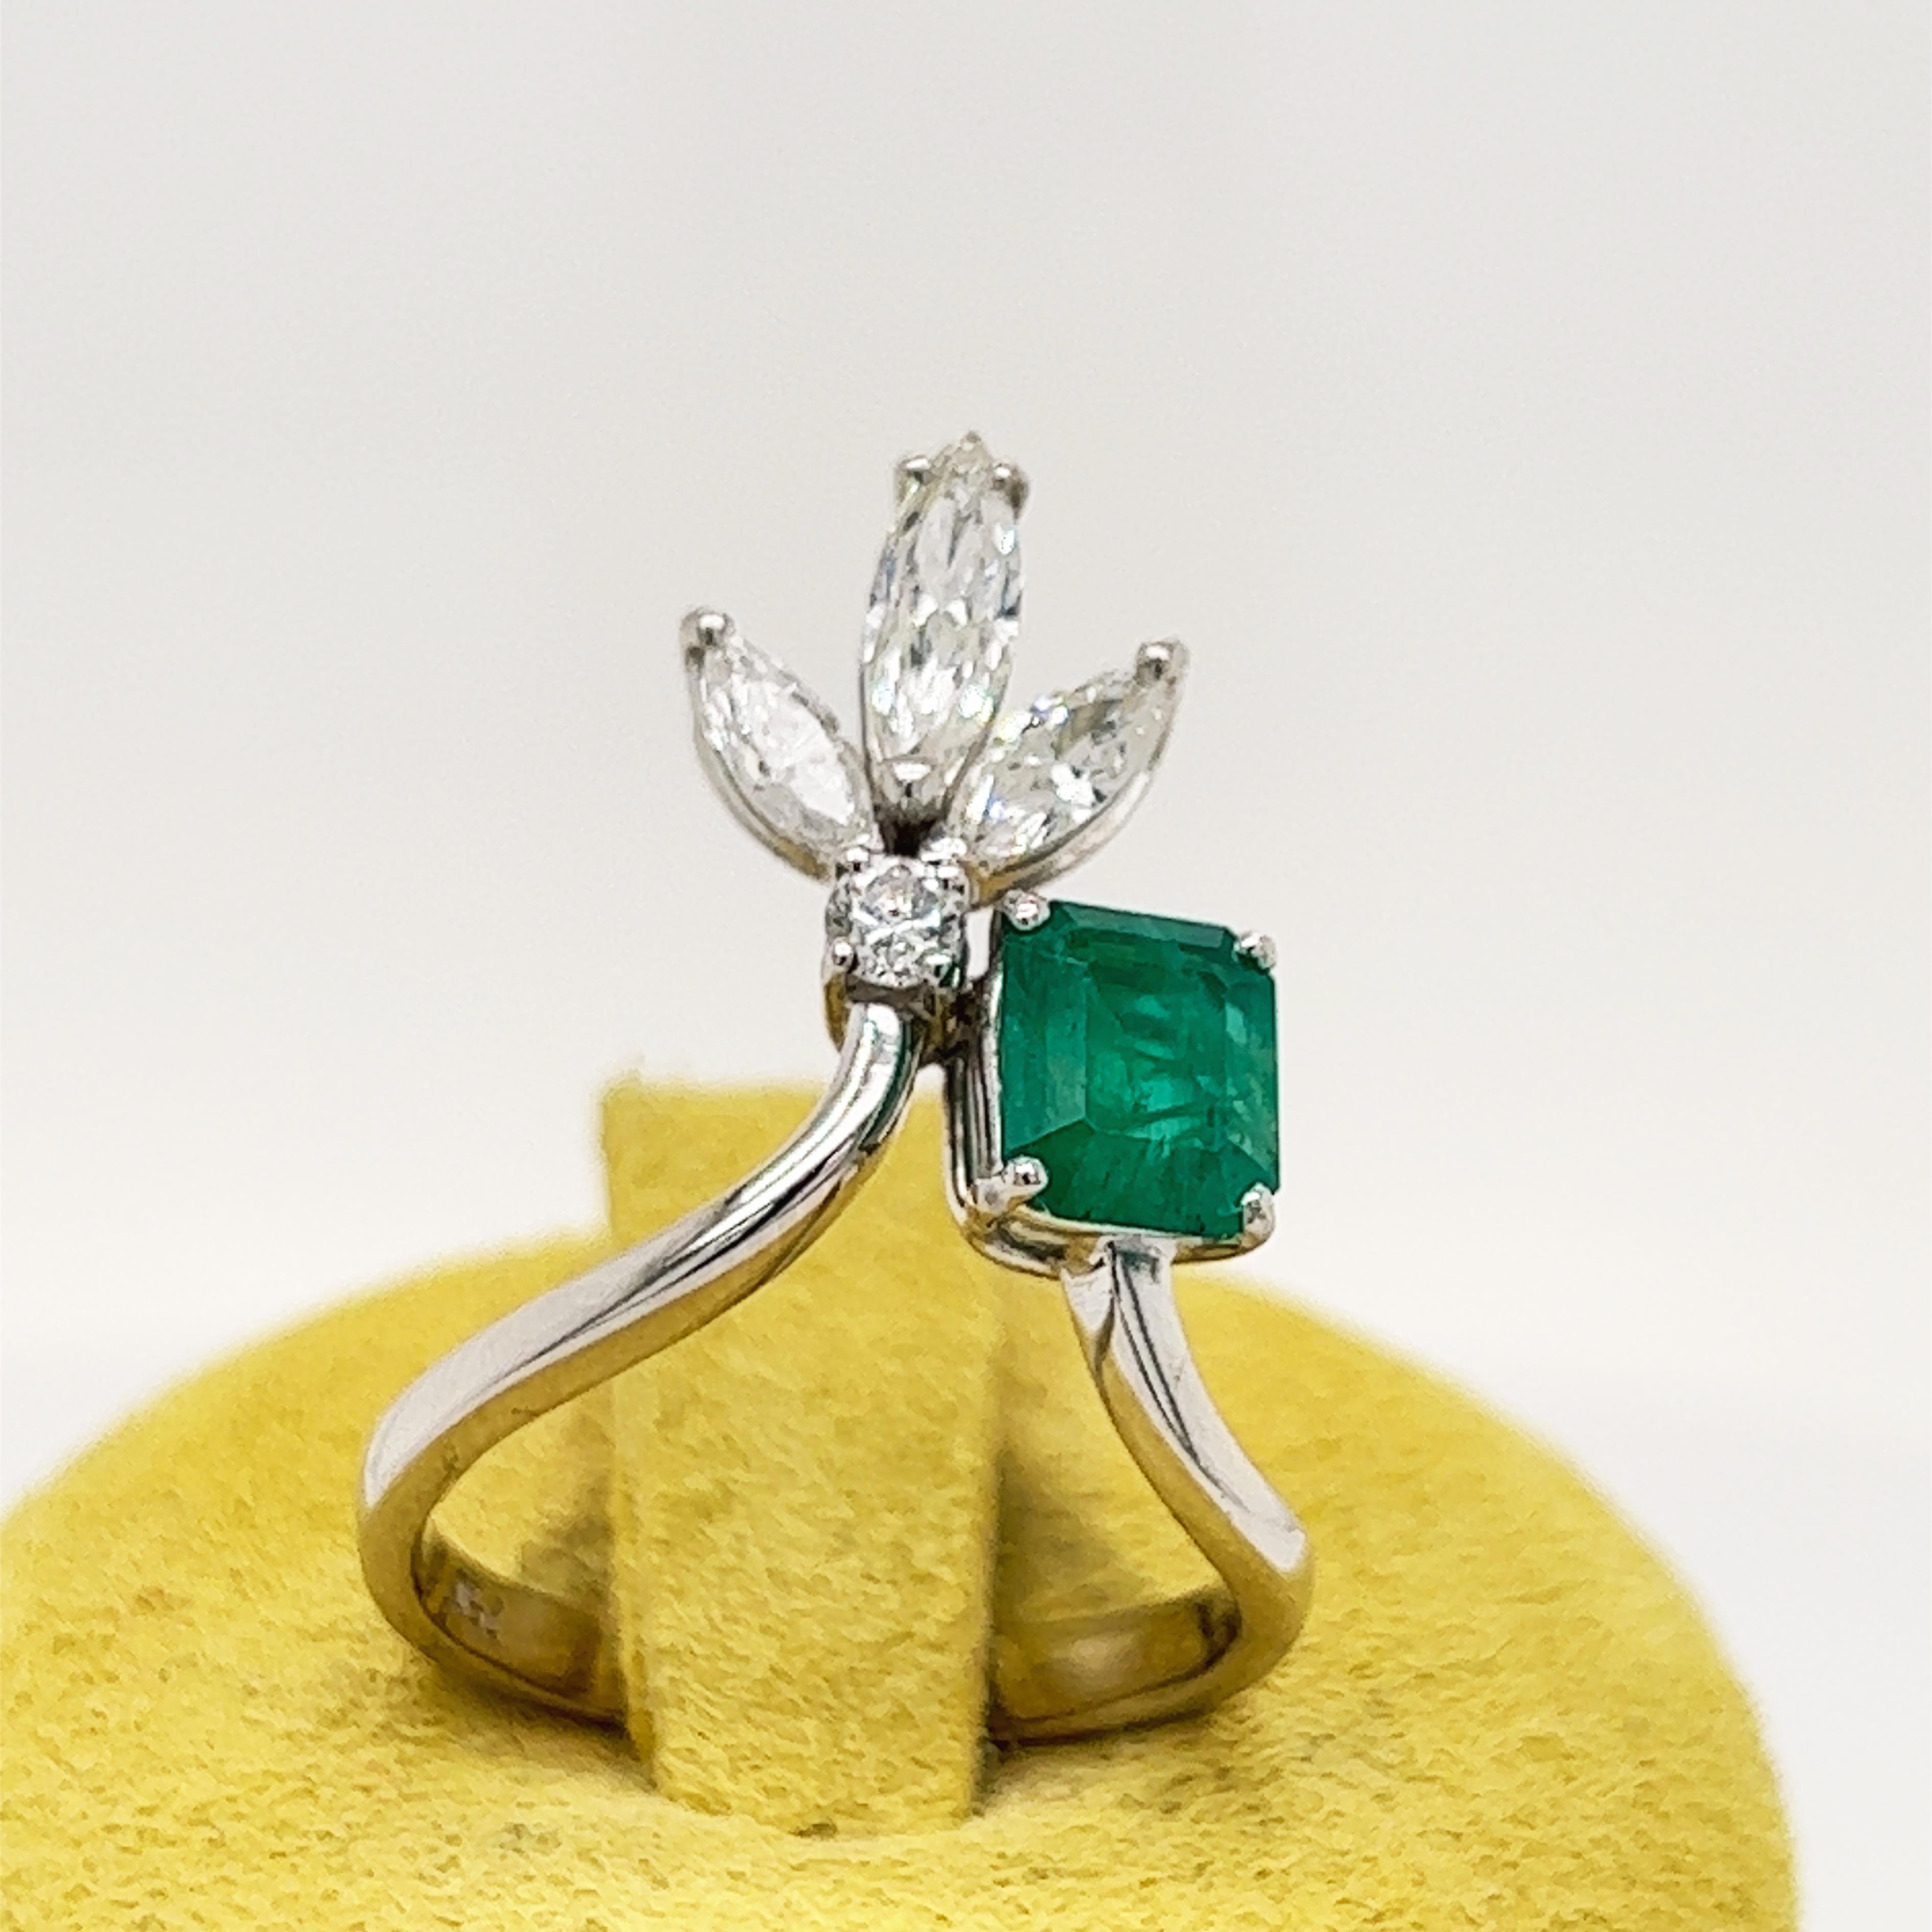 A chic, one-of-a-kind beautifully handcrafted 1970 Cocktail ring featuring a 0.82Kt square cut Muzo Emerald in a 0.39Kt white diamond marquise and brilliant cut, 18kt white gold setting.
A detailed gemological certificate will be included.
In our